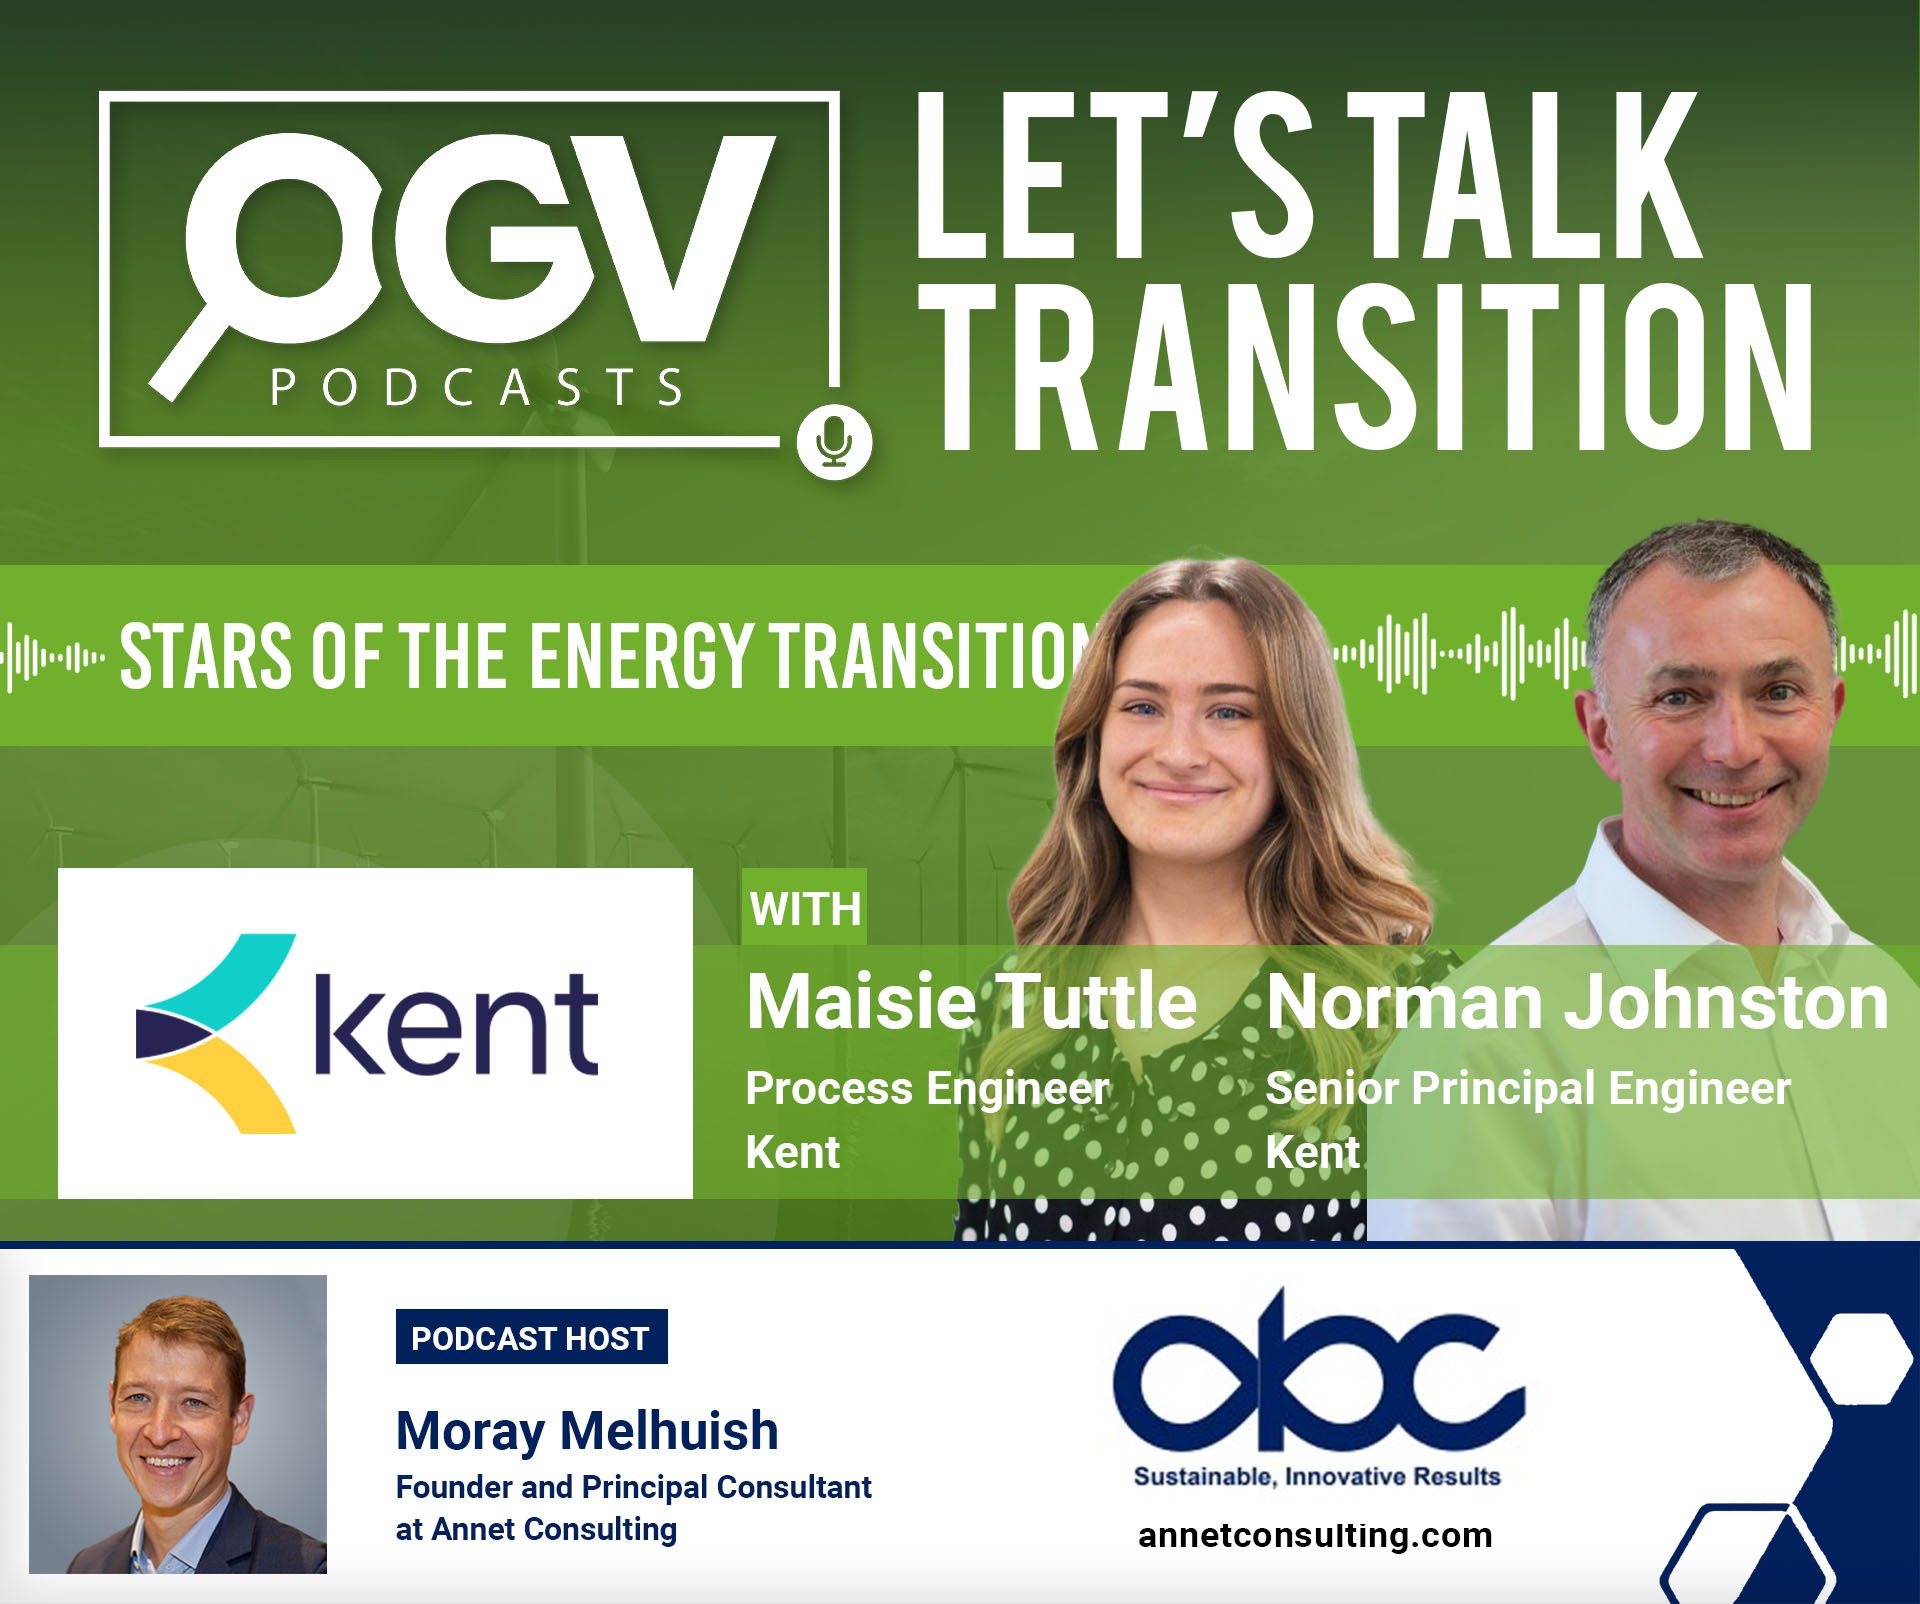 Stars of the Energy Transition